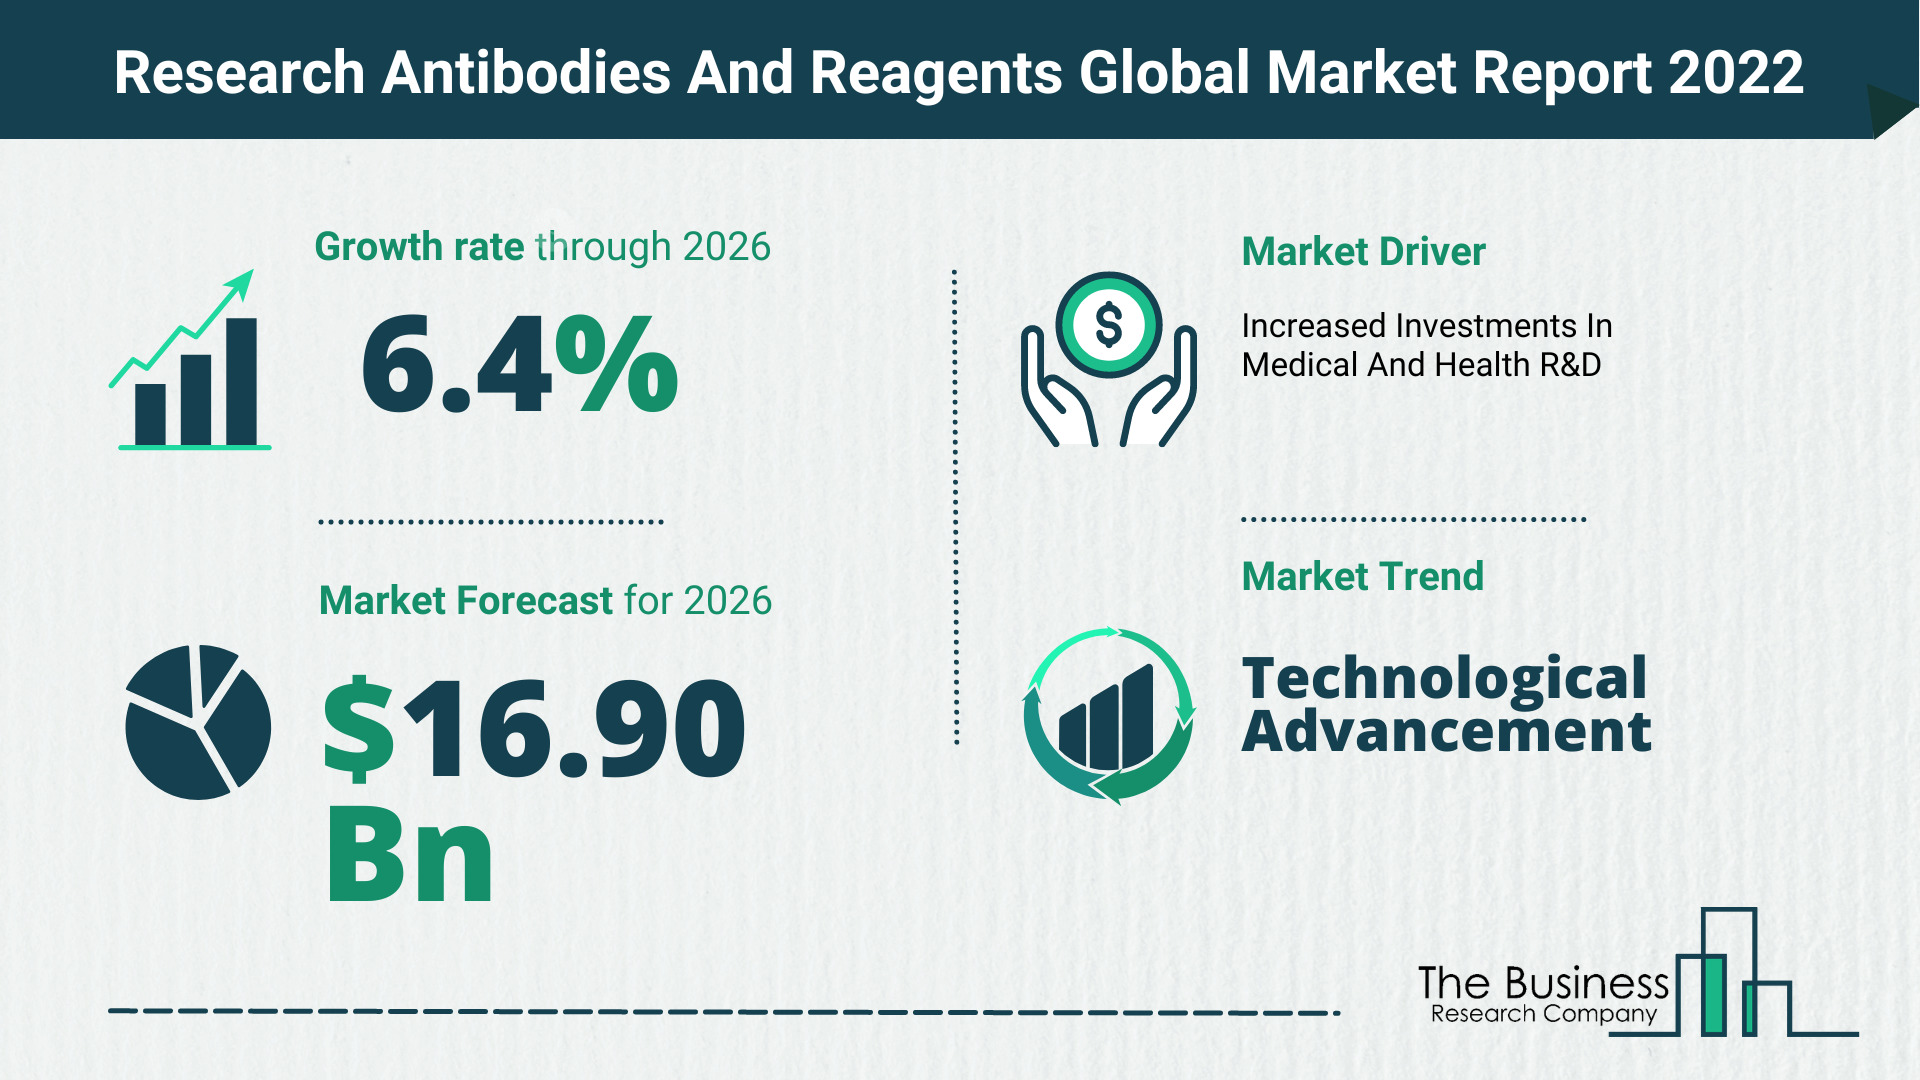 What Is The Research Antibodies And Reagents Market Overview In 2022?